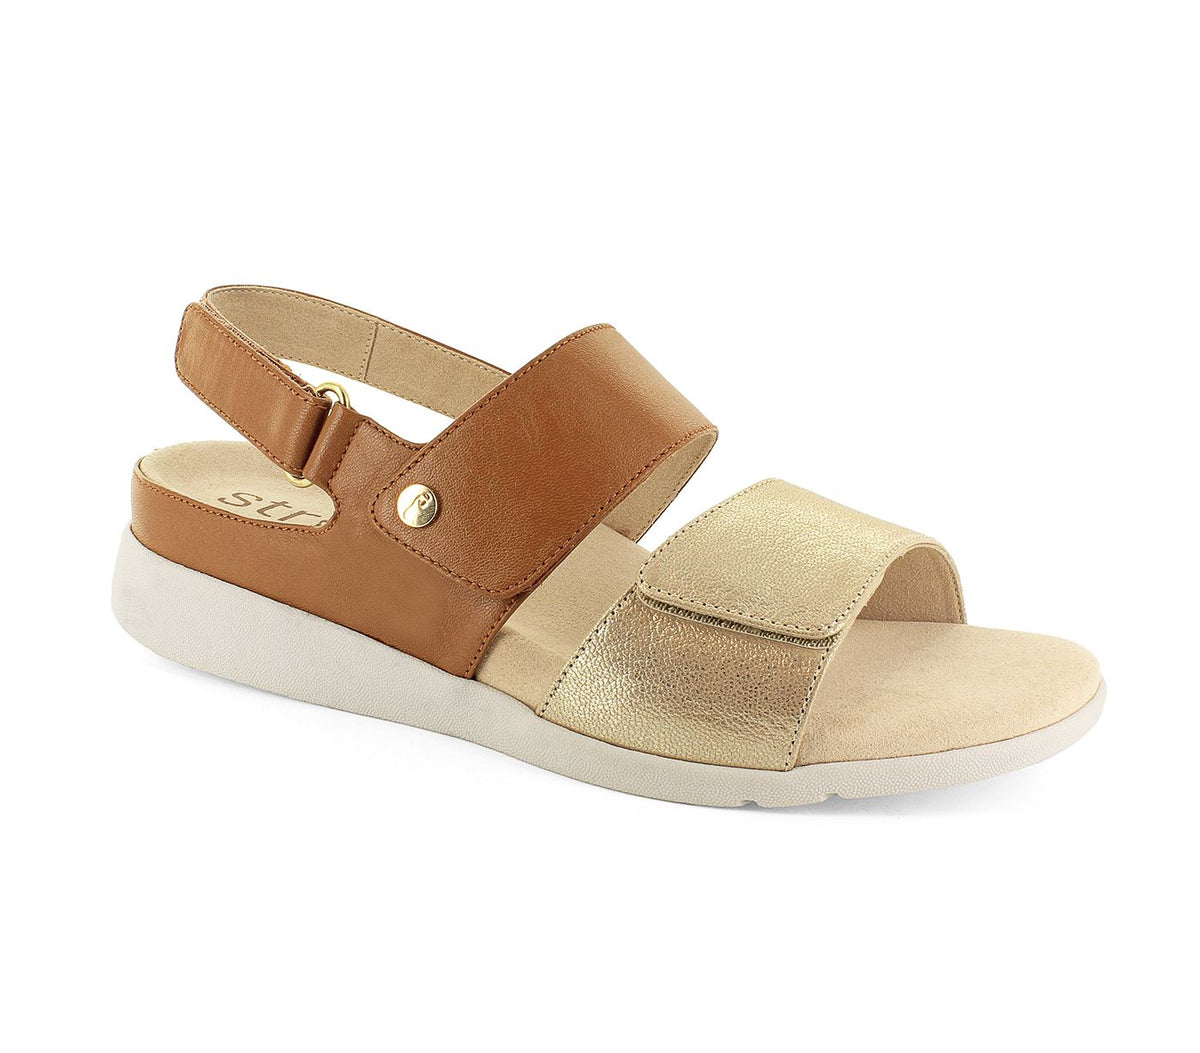 Strive - Riviera Tan and Gold Velcro Leather Sandal